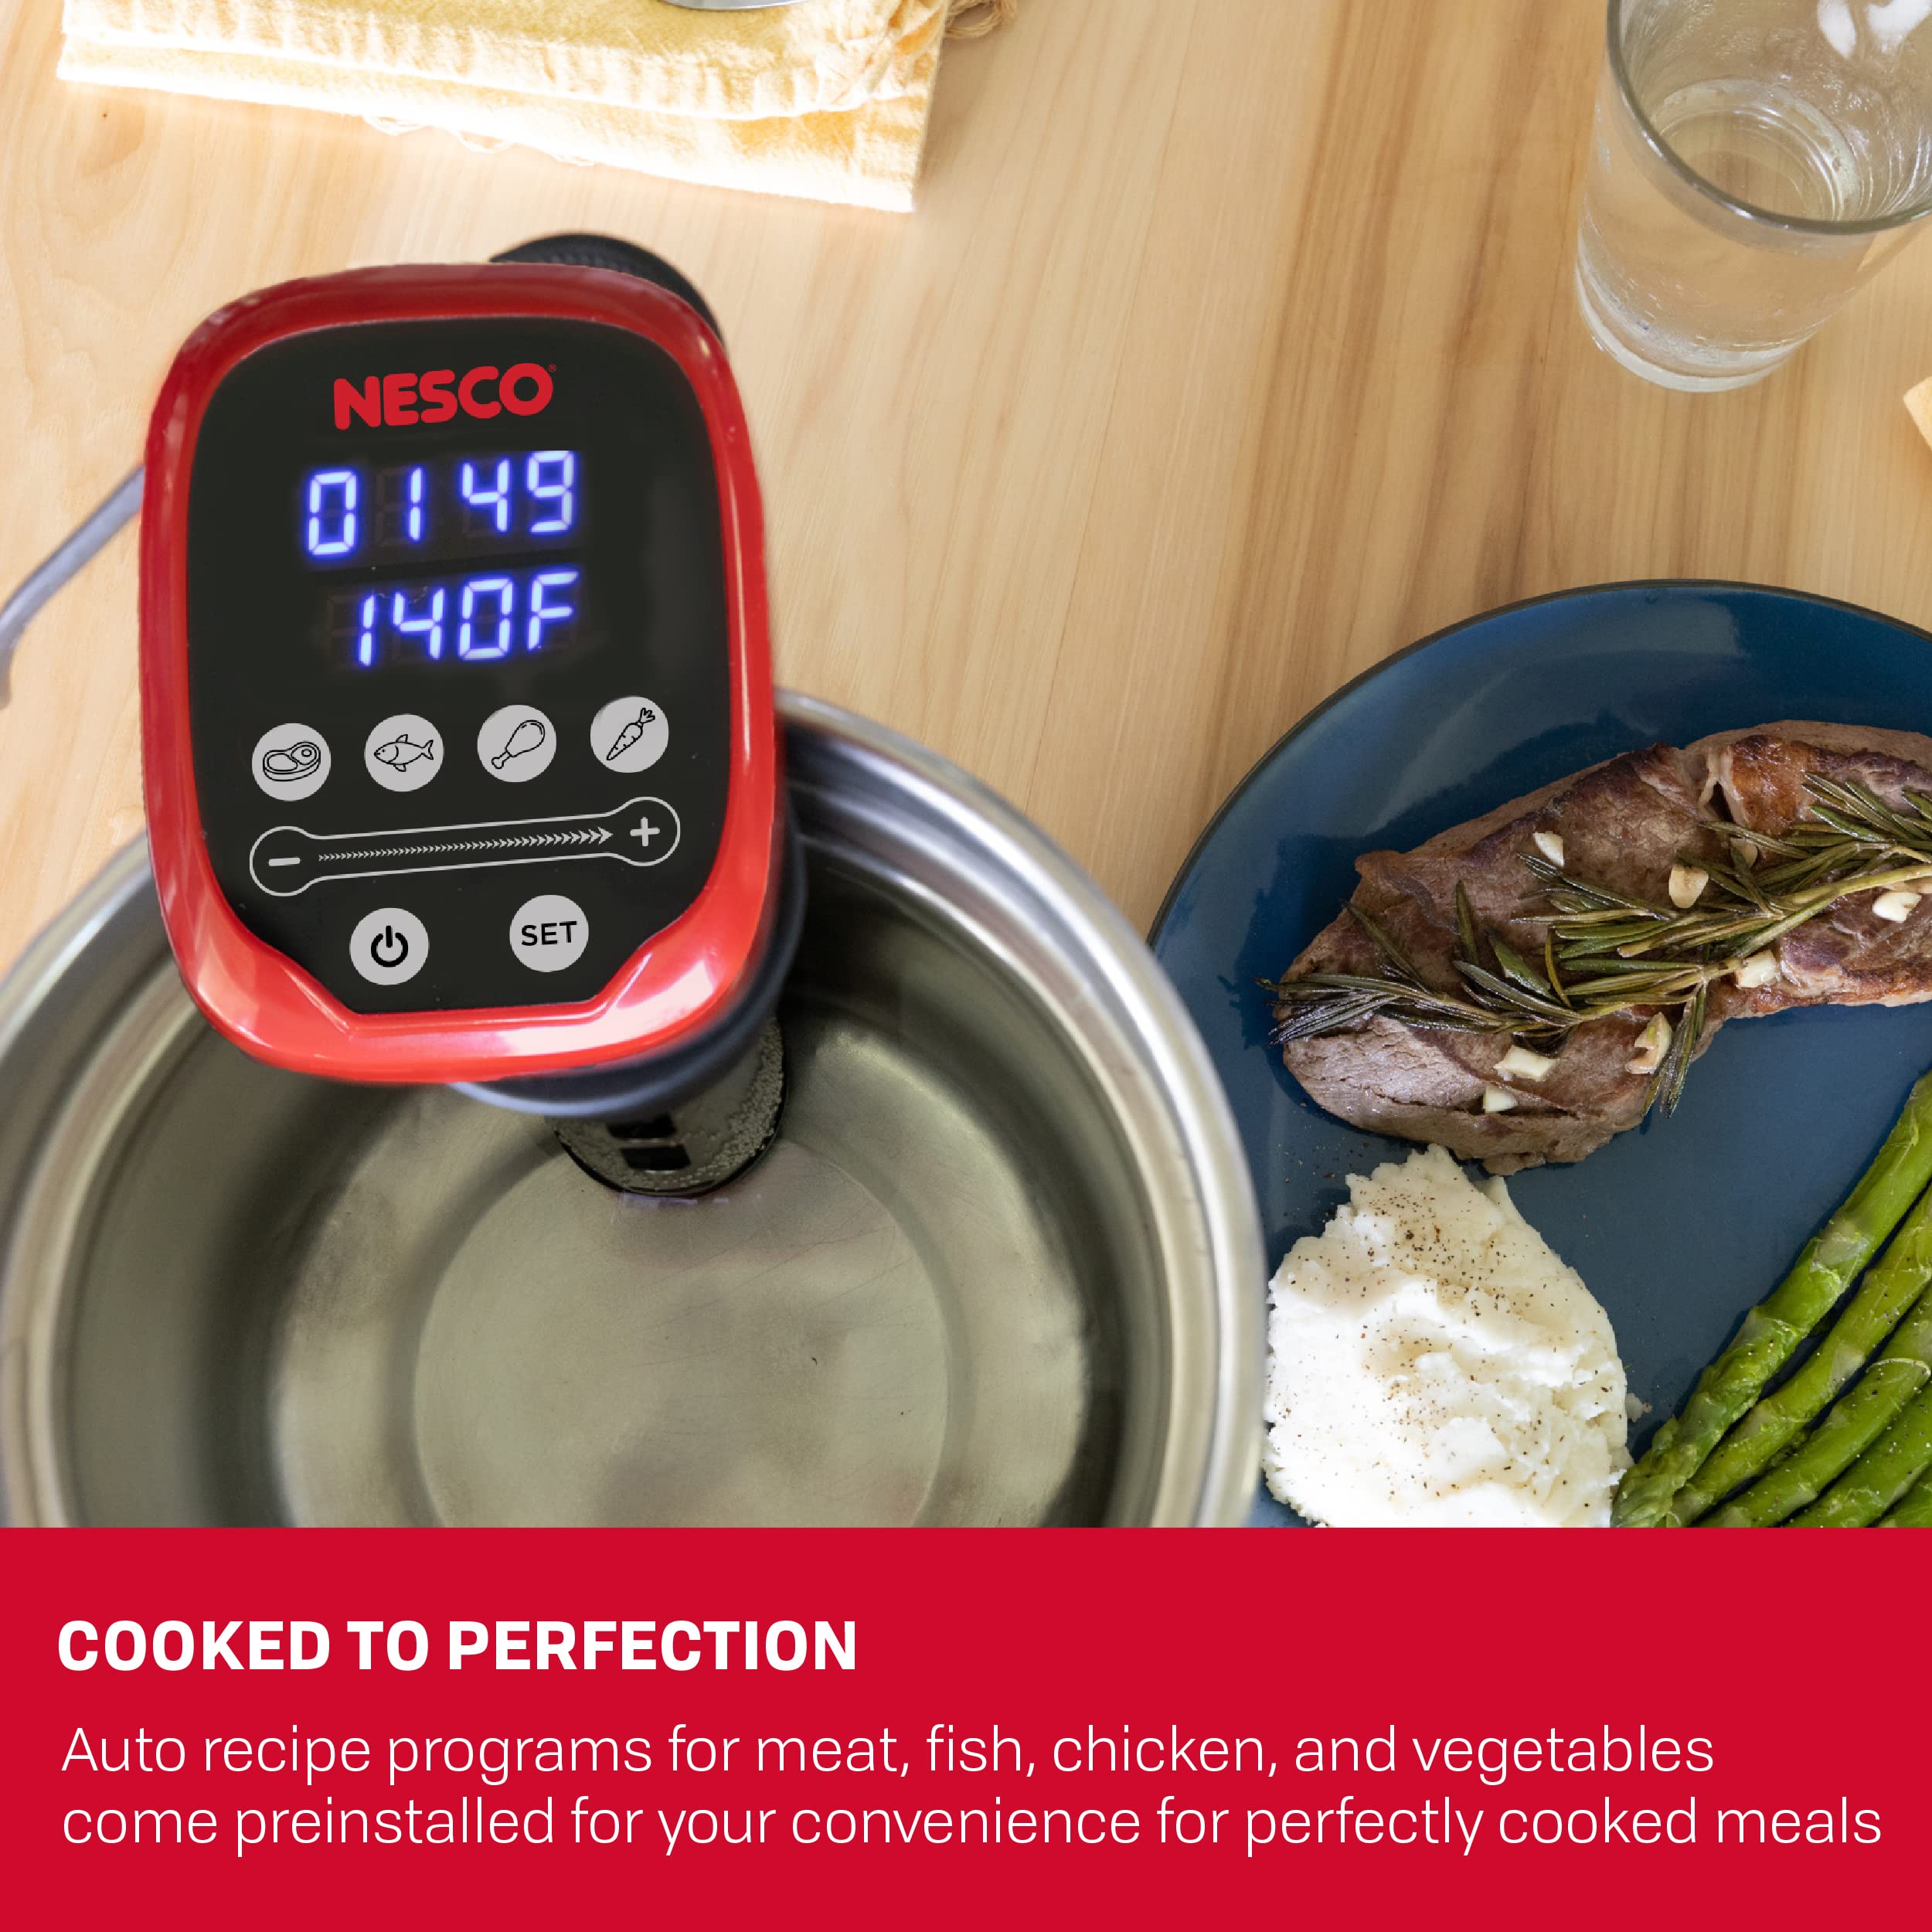 Nesco SVC-1000 Sous Vide Precision Cooker with Digital Display and Pre-Programmed Cooking Options for Meat, Fish, Chicken and Vegetables, 1000 Watts, Red and Black